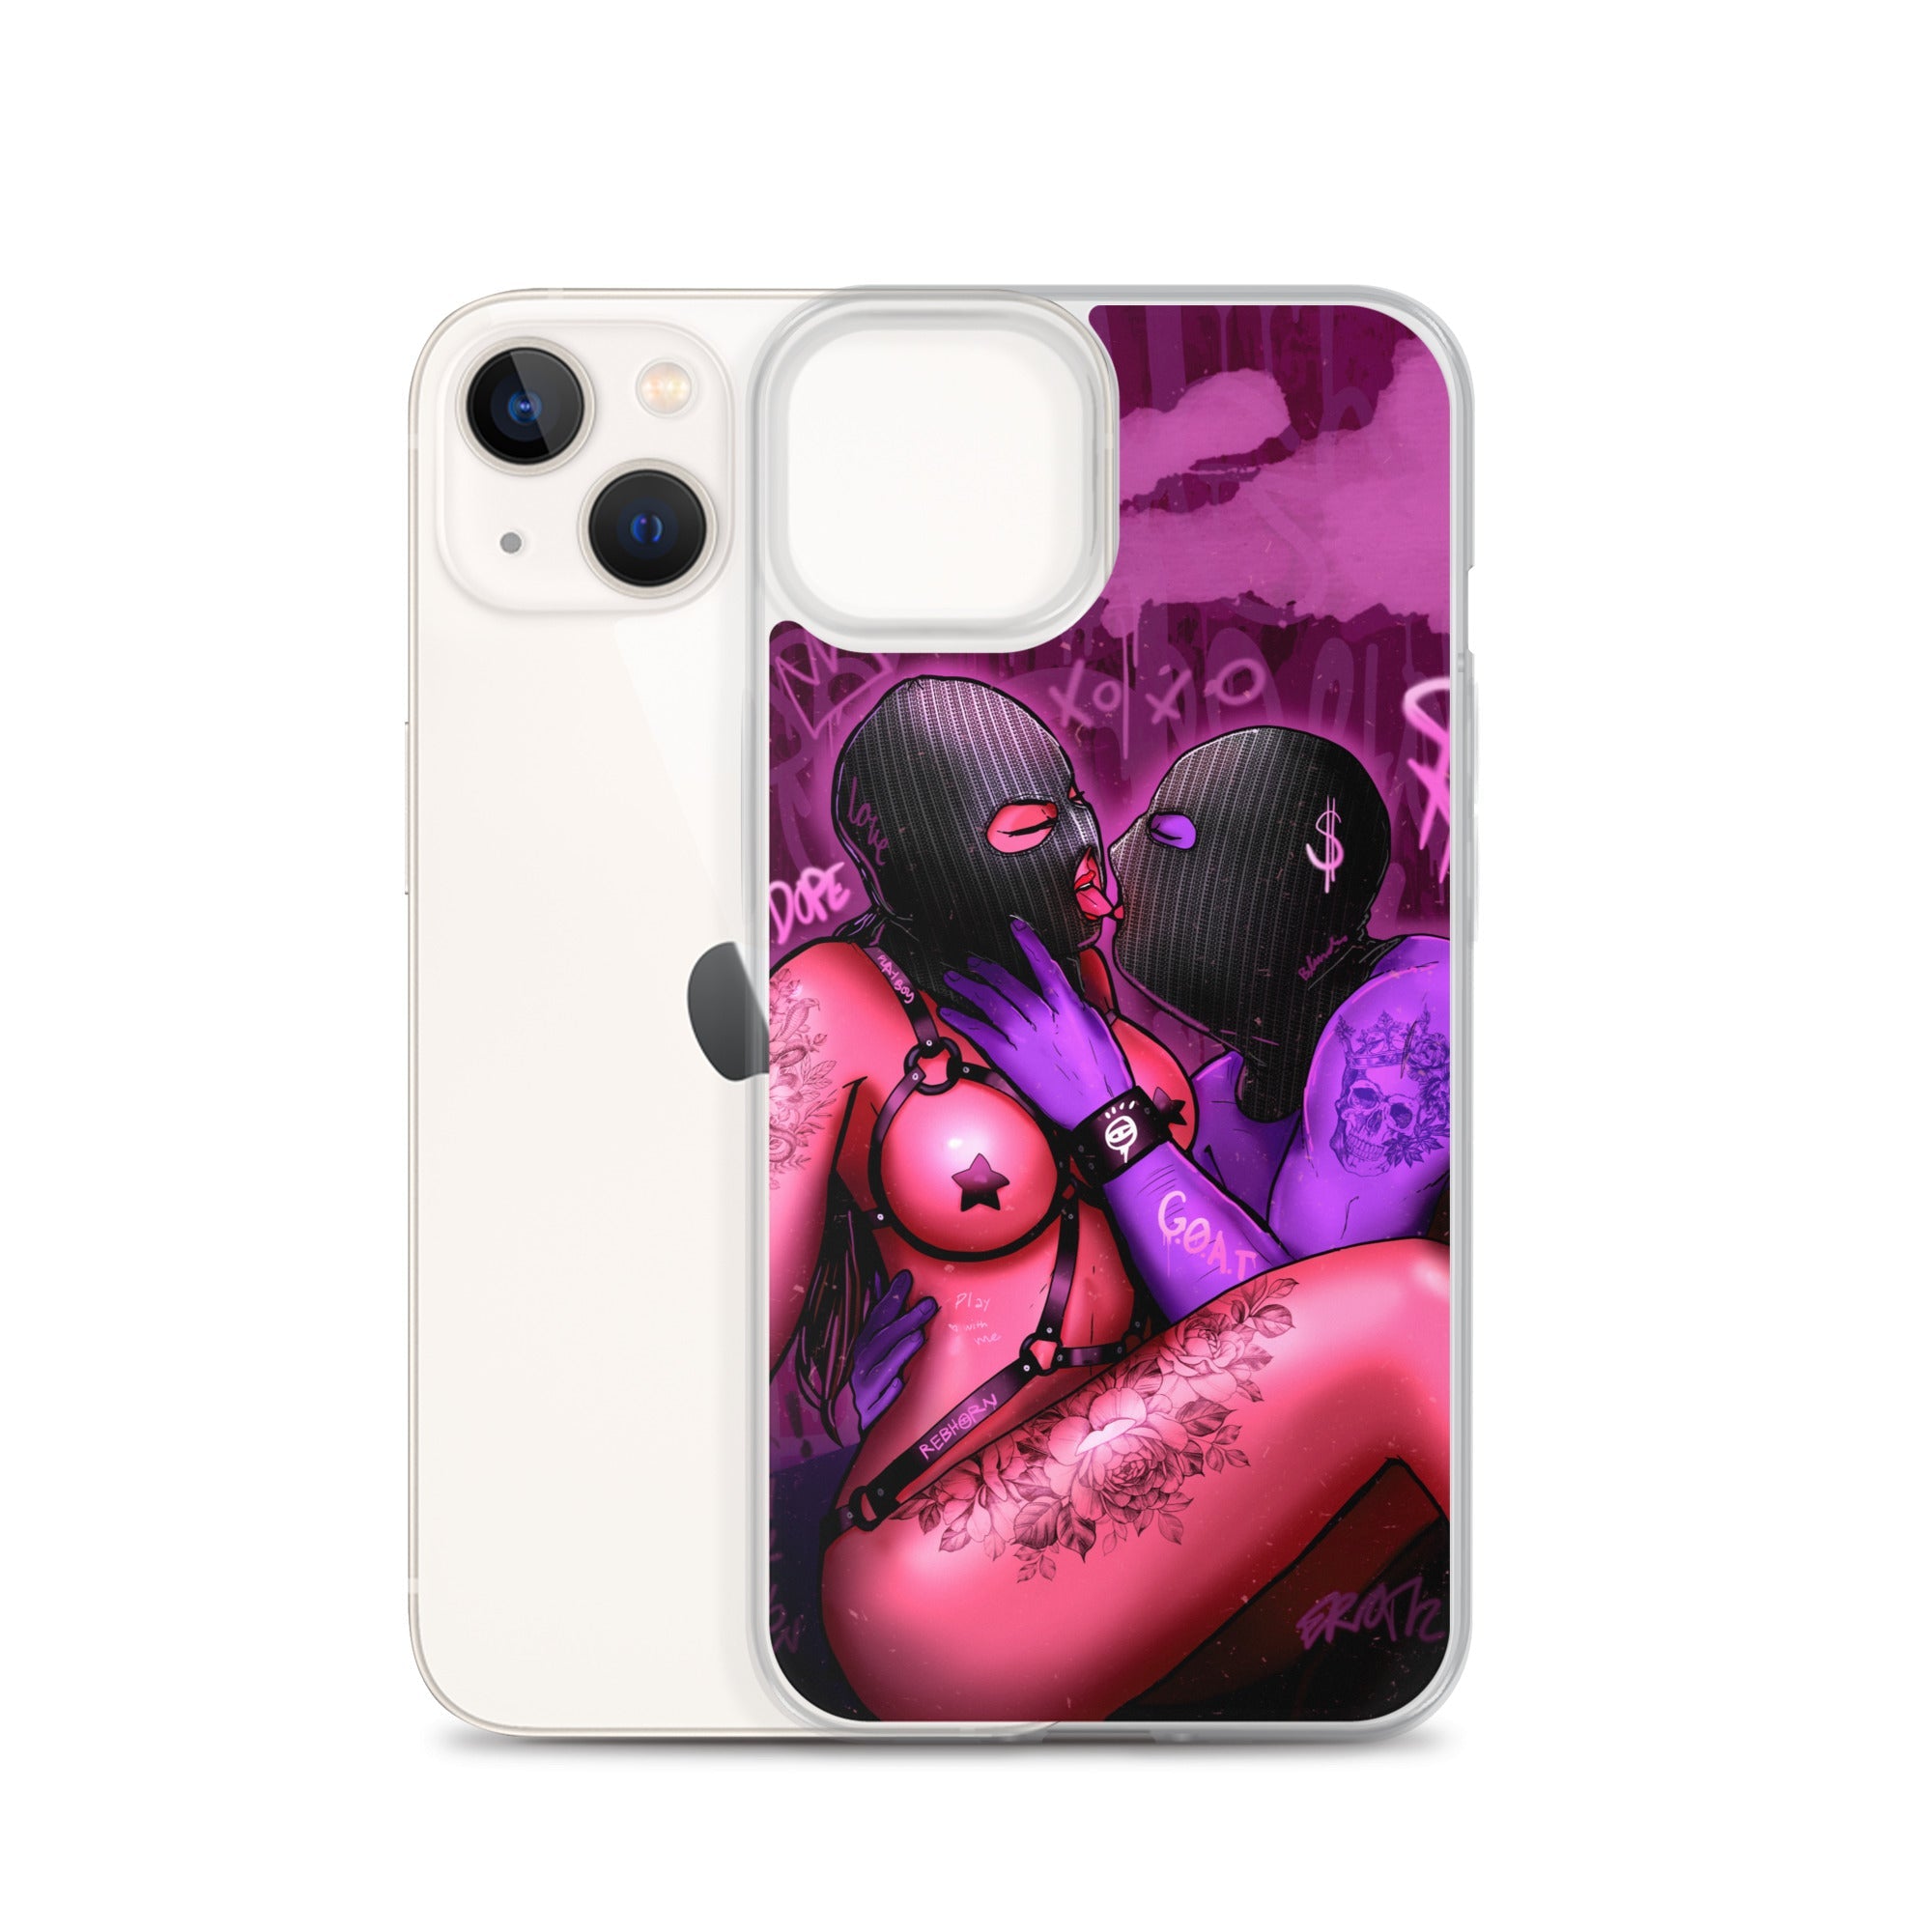 Erotica - Blinded By Love iPhone Case - REBHORN DESIGN